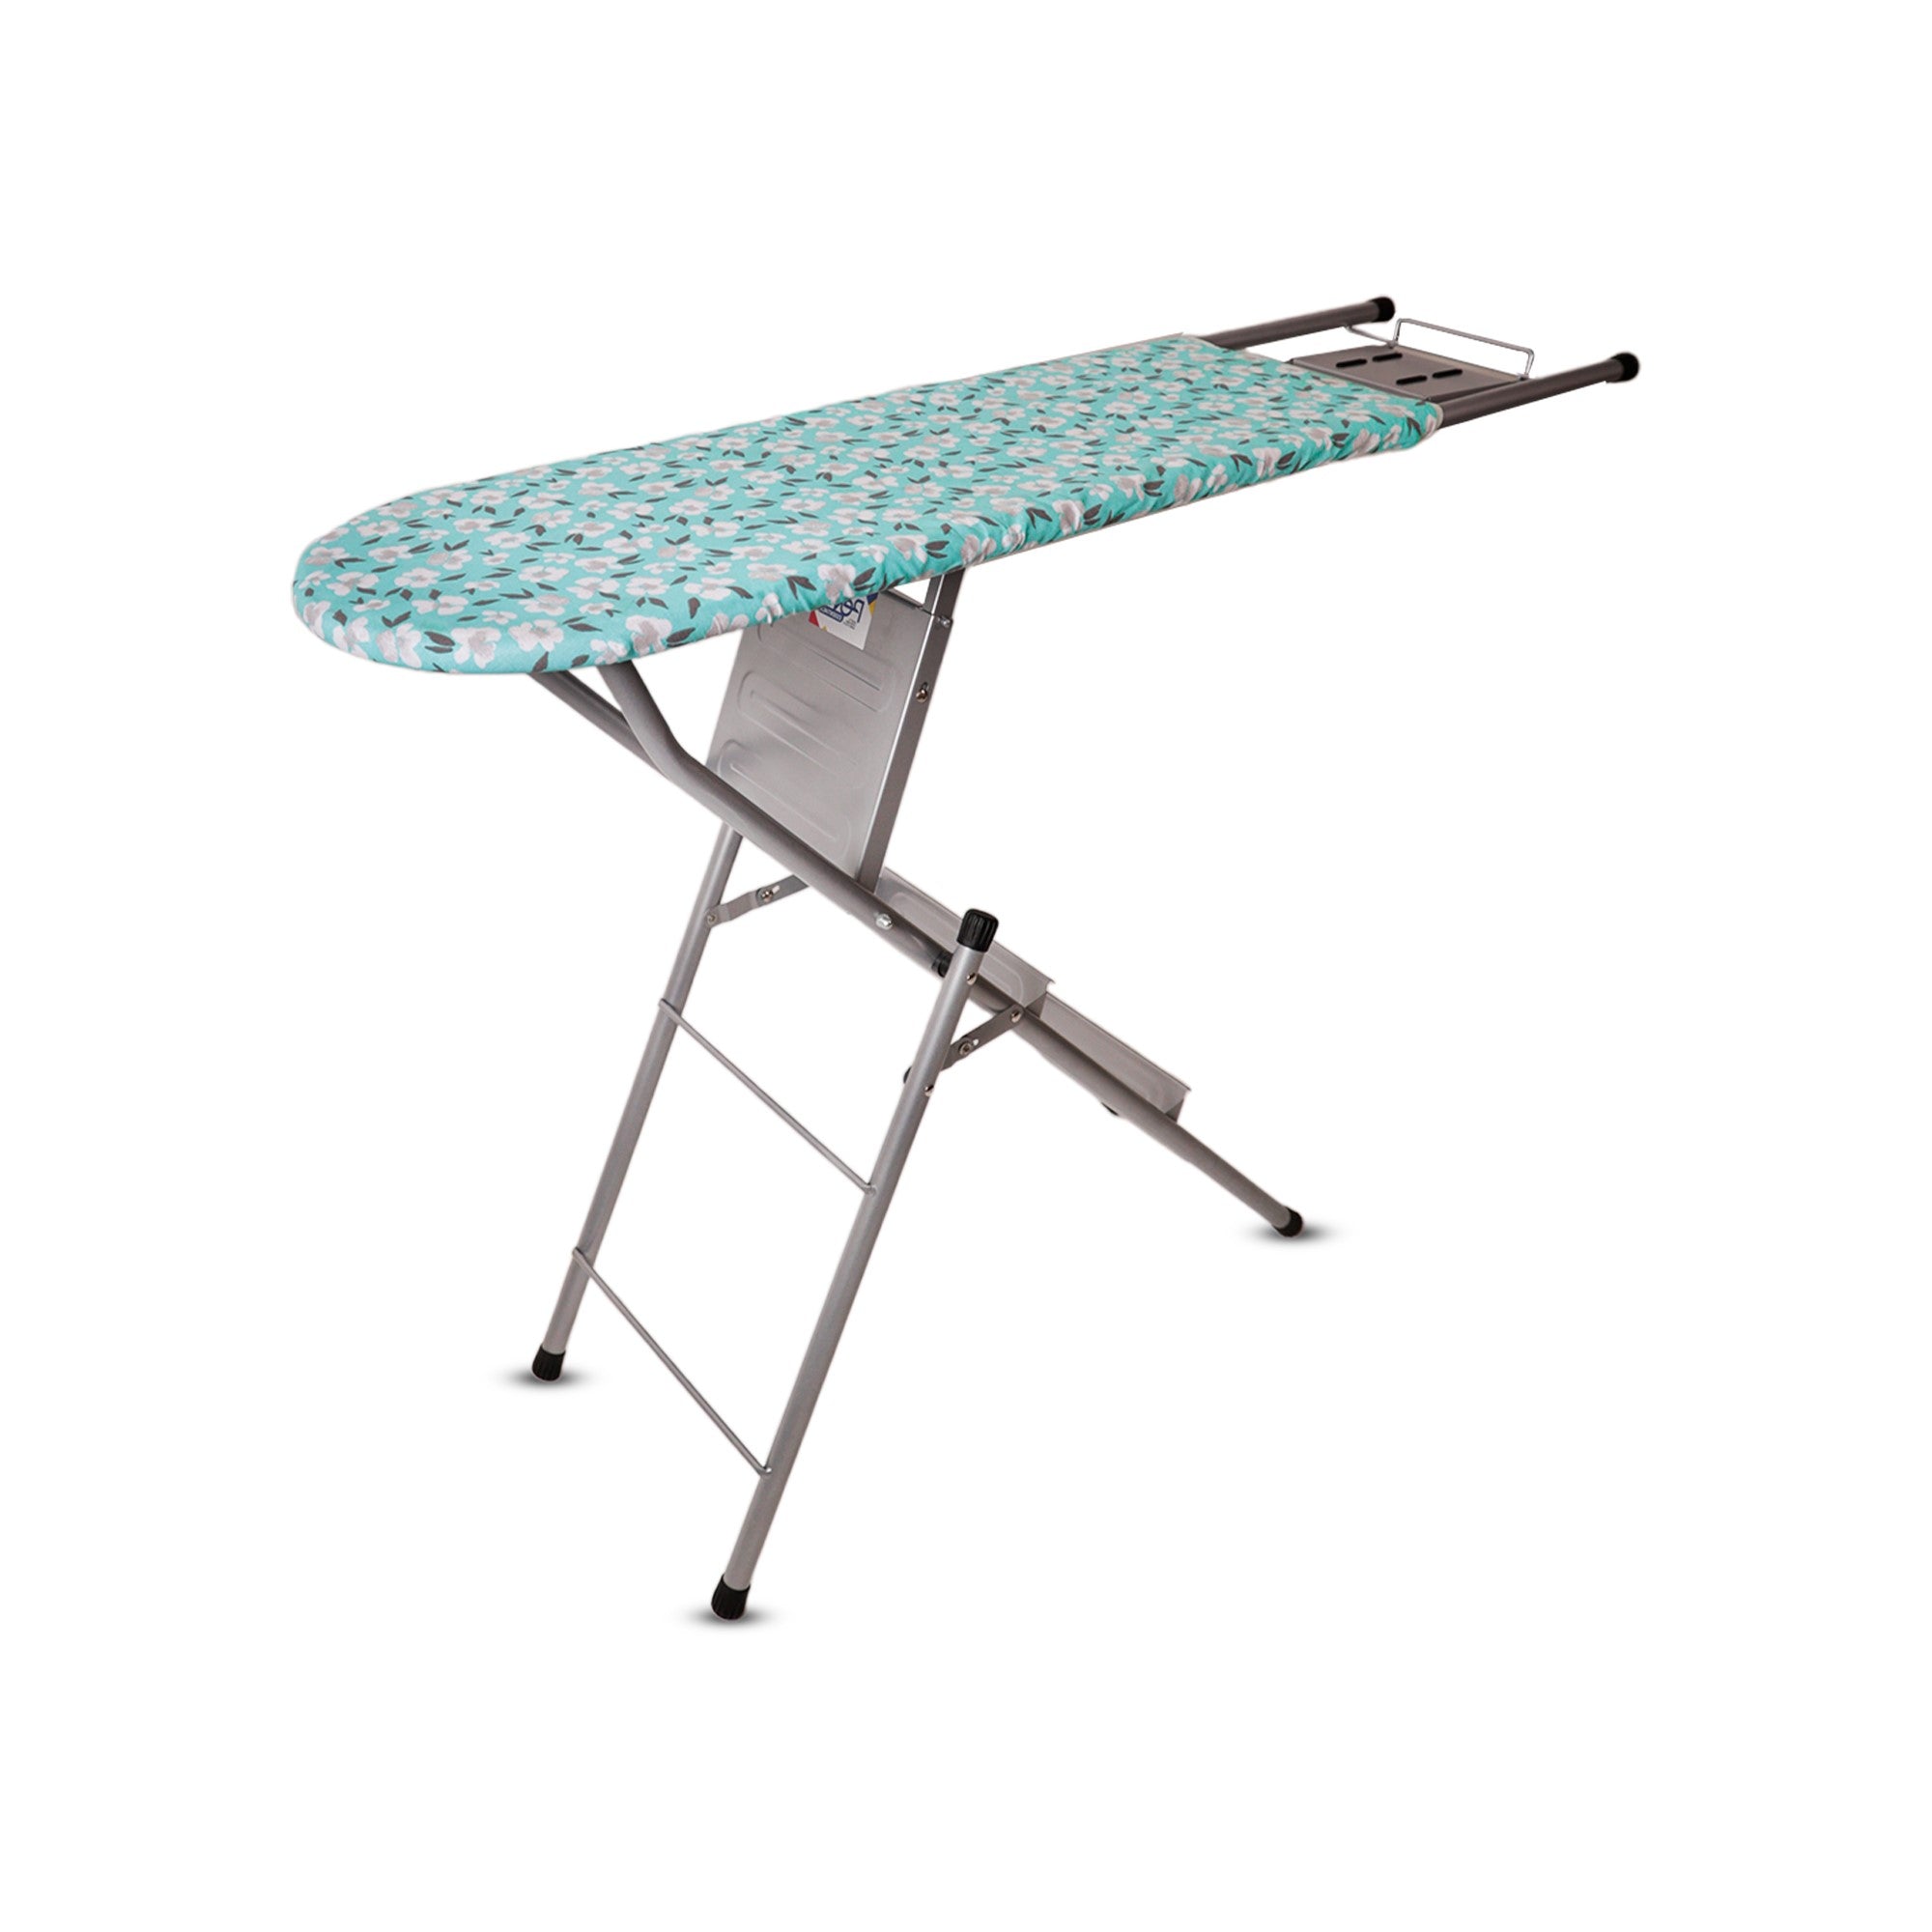 MultiComfort Ironing Board |  2 in 1 Ladder Ironing Board with Step Ladder I Green